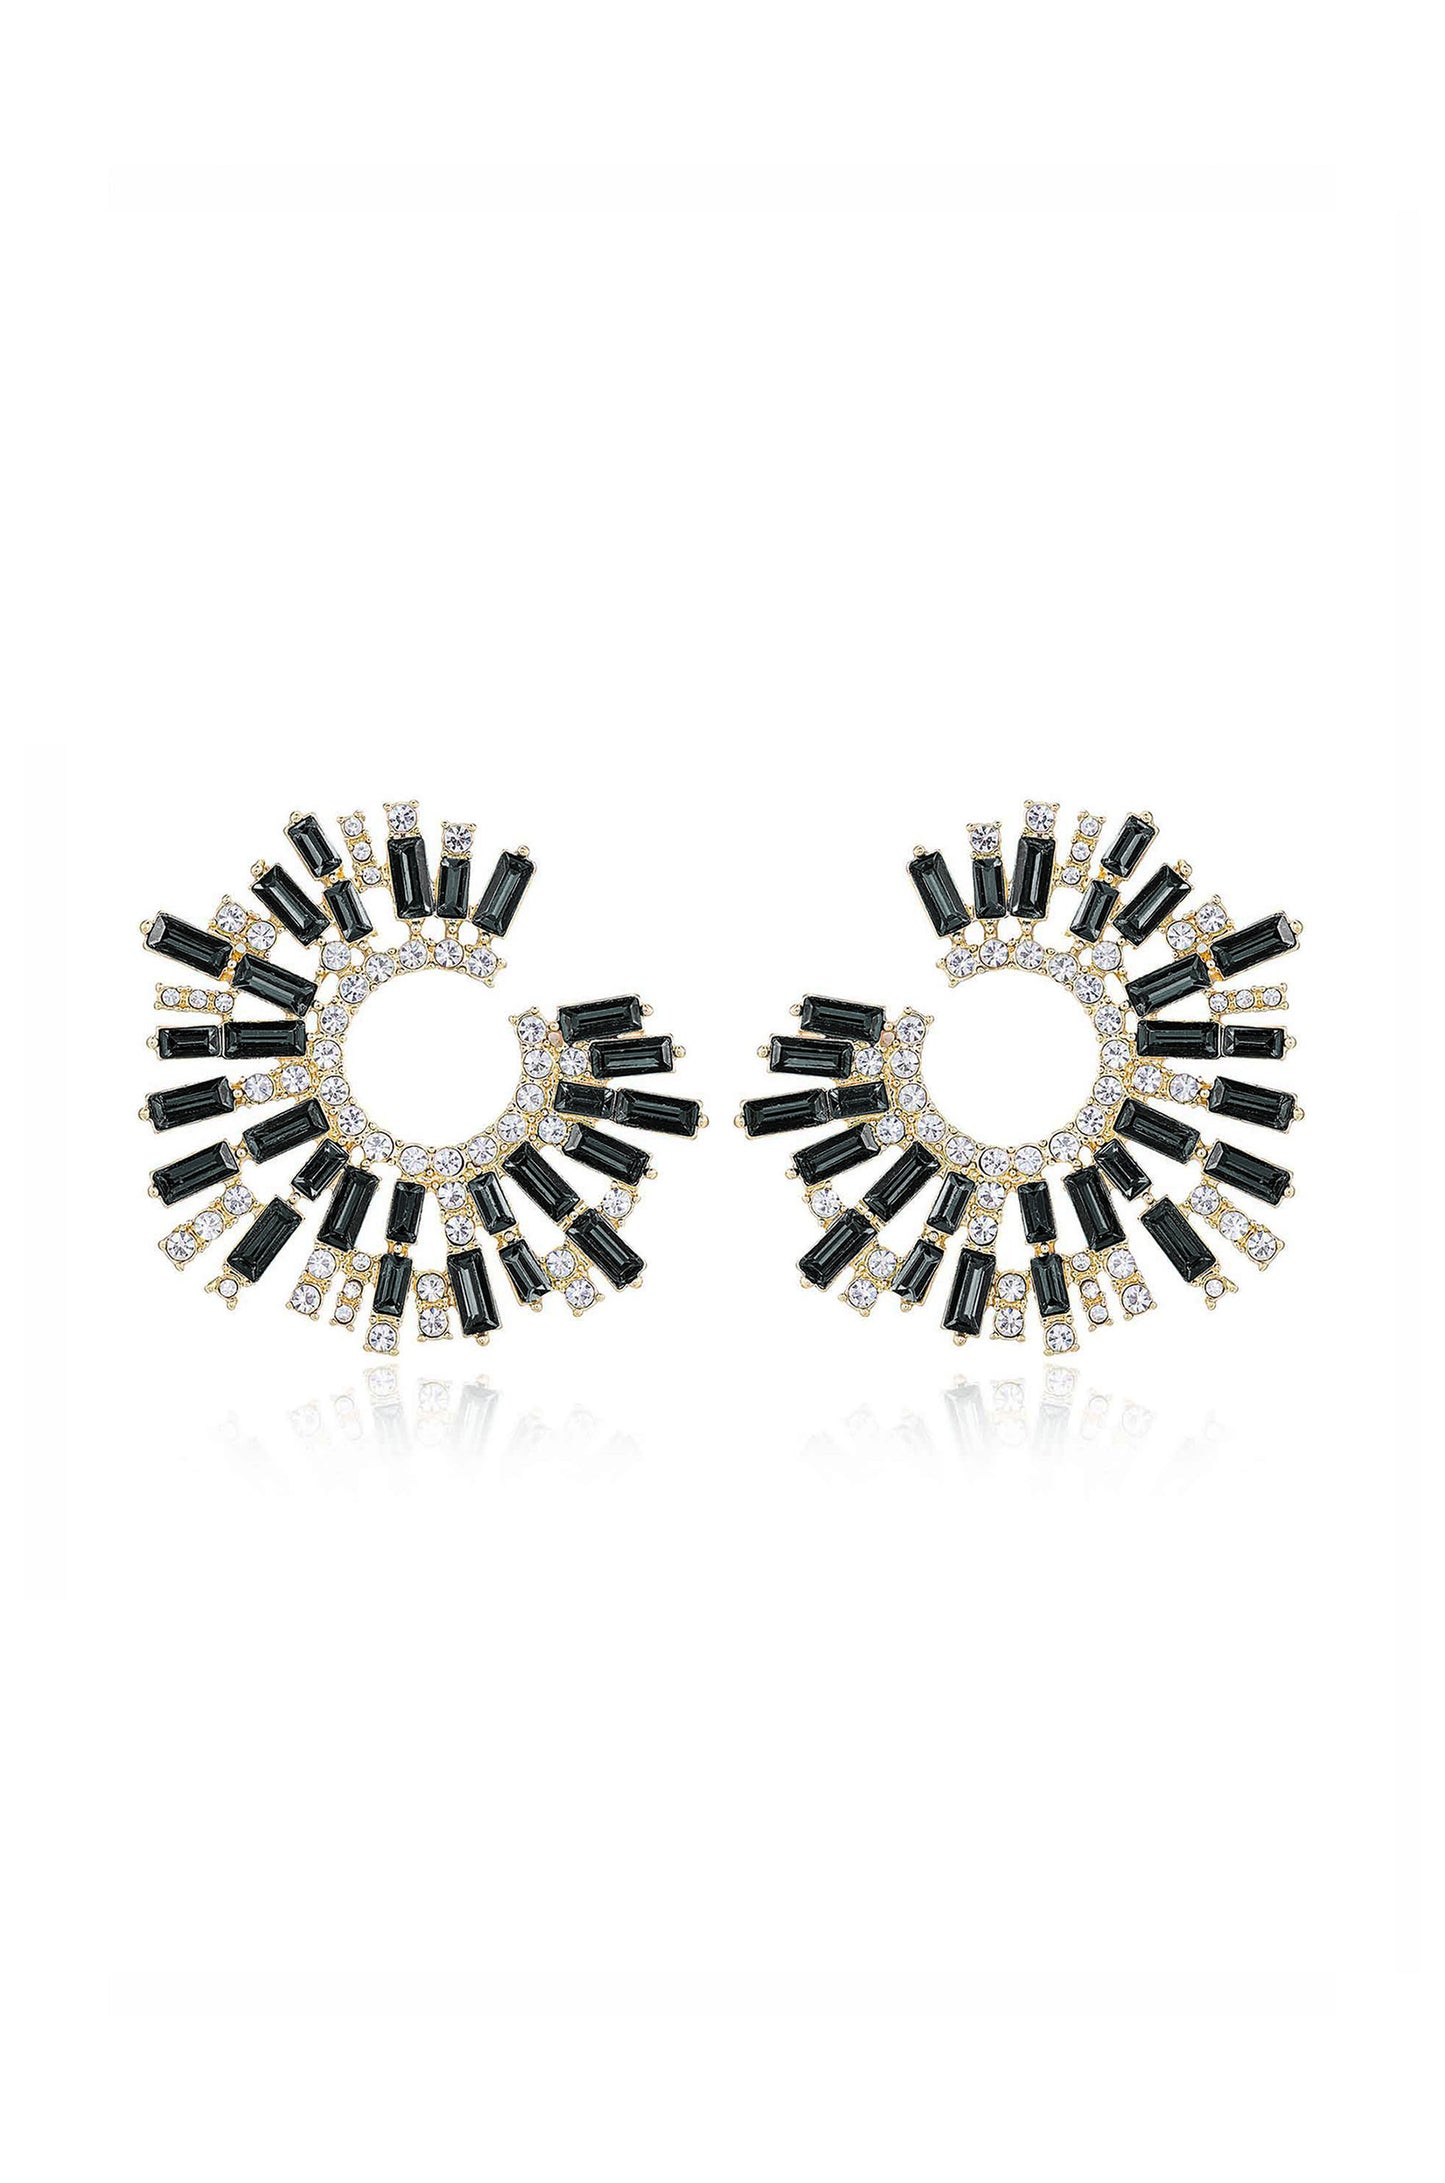 Opulent Crystal Stardust 18k Gold Plated Open Circle Earrings in black